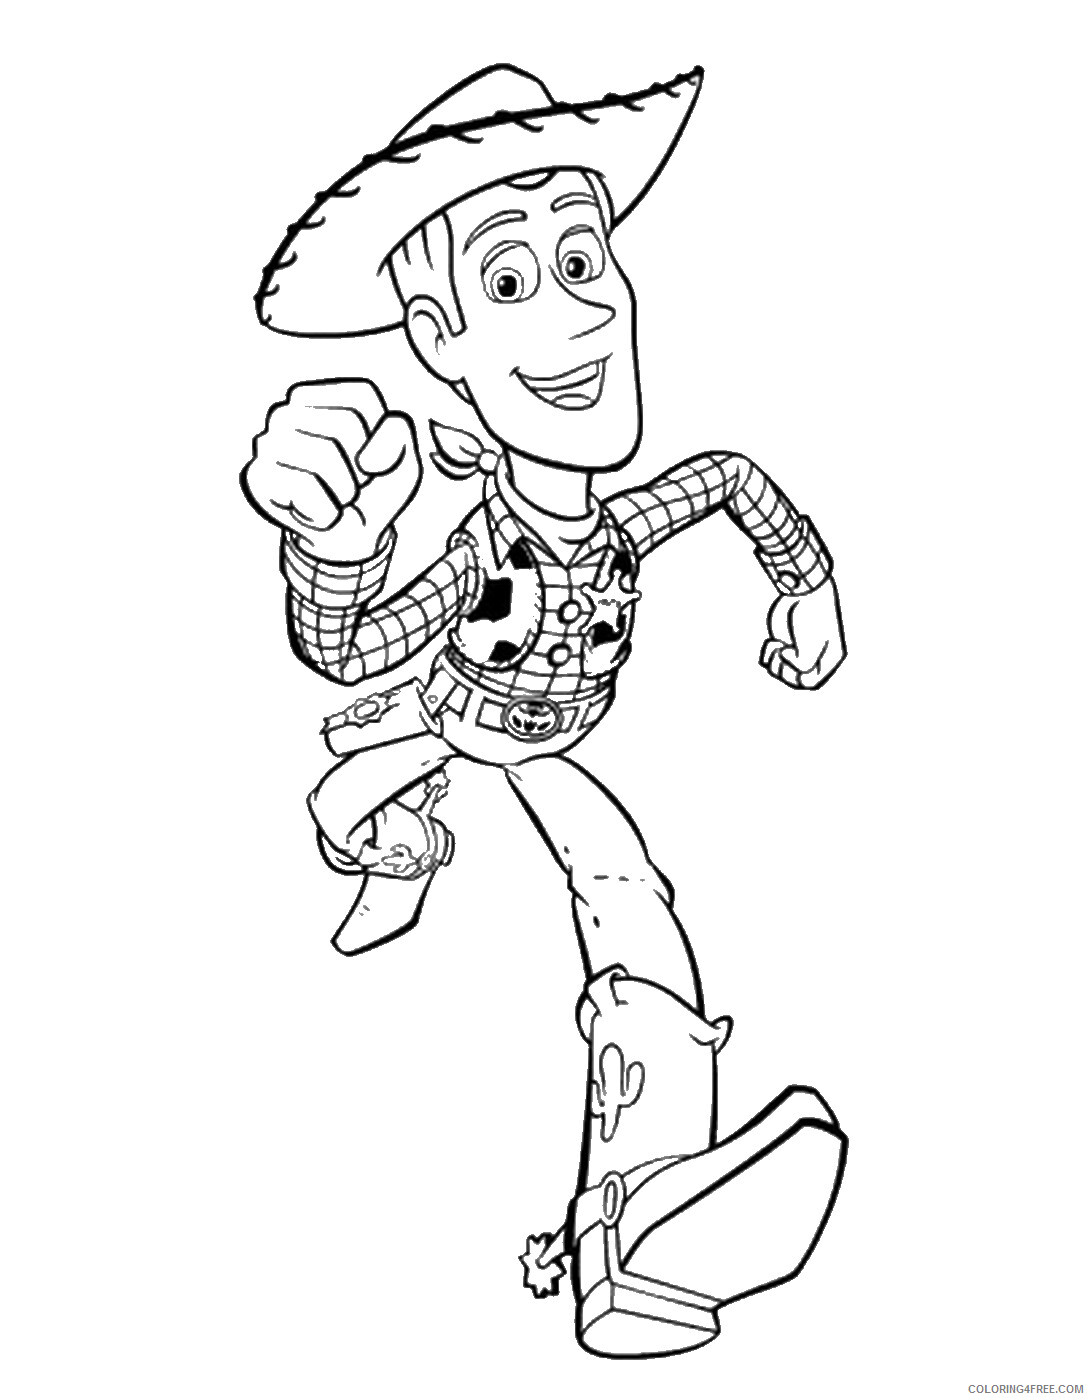 Toy Story Coloring Pages TV Film toystory_31 Printable 2020 10383 Coloring4free